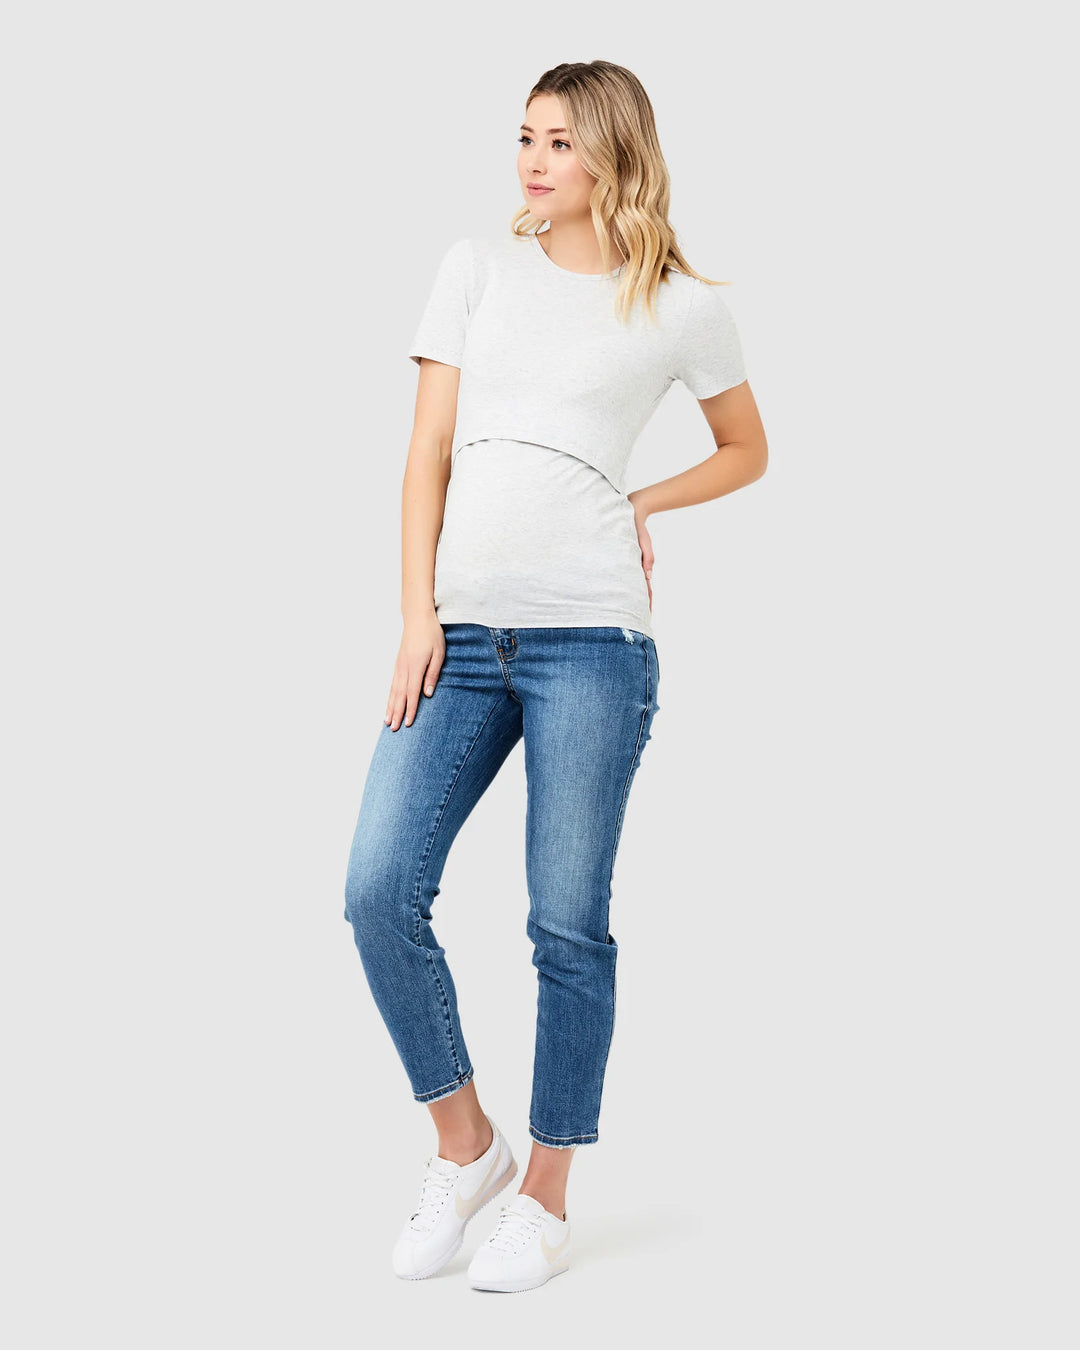 Back to Basics:  Simple & Cute Breastfeeding-Friendly Tops for Canadian Parents